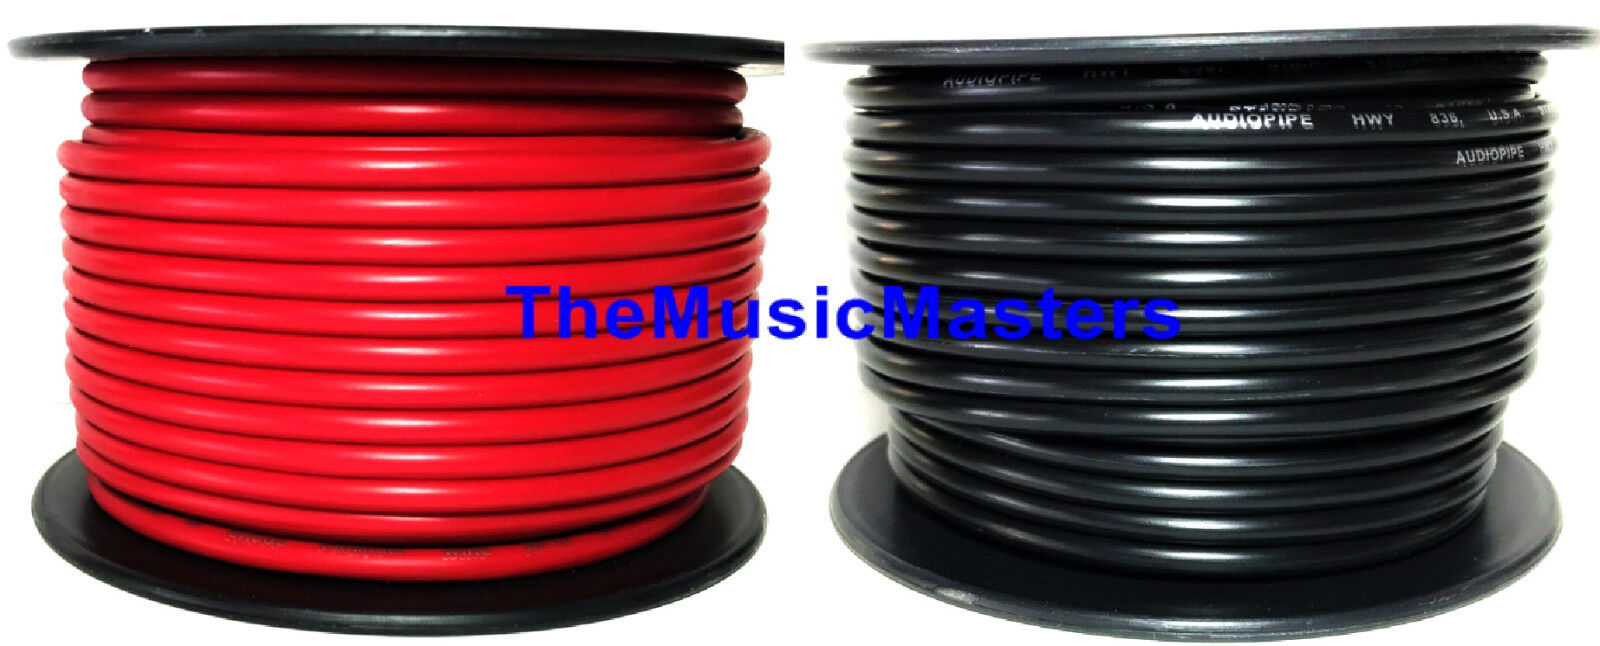 18 Gauge 100' ft each Red Black Auto PRIMARY WIRE 12V Wiring Car Power Cable